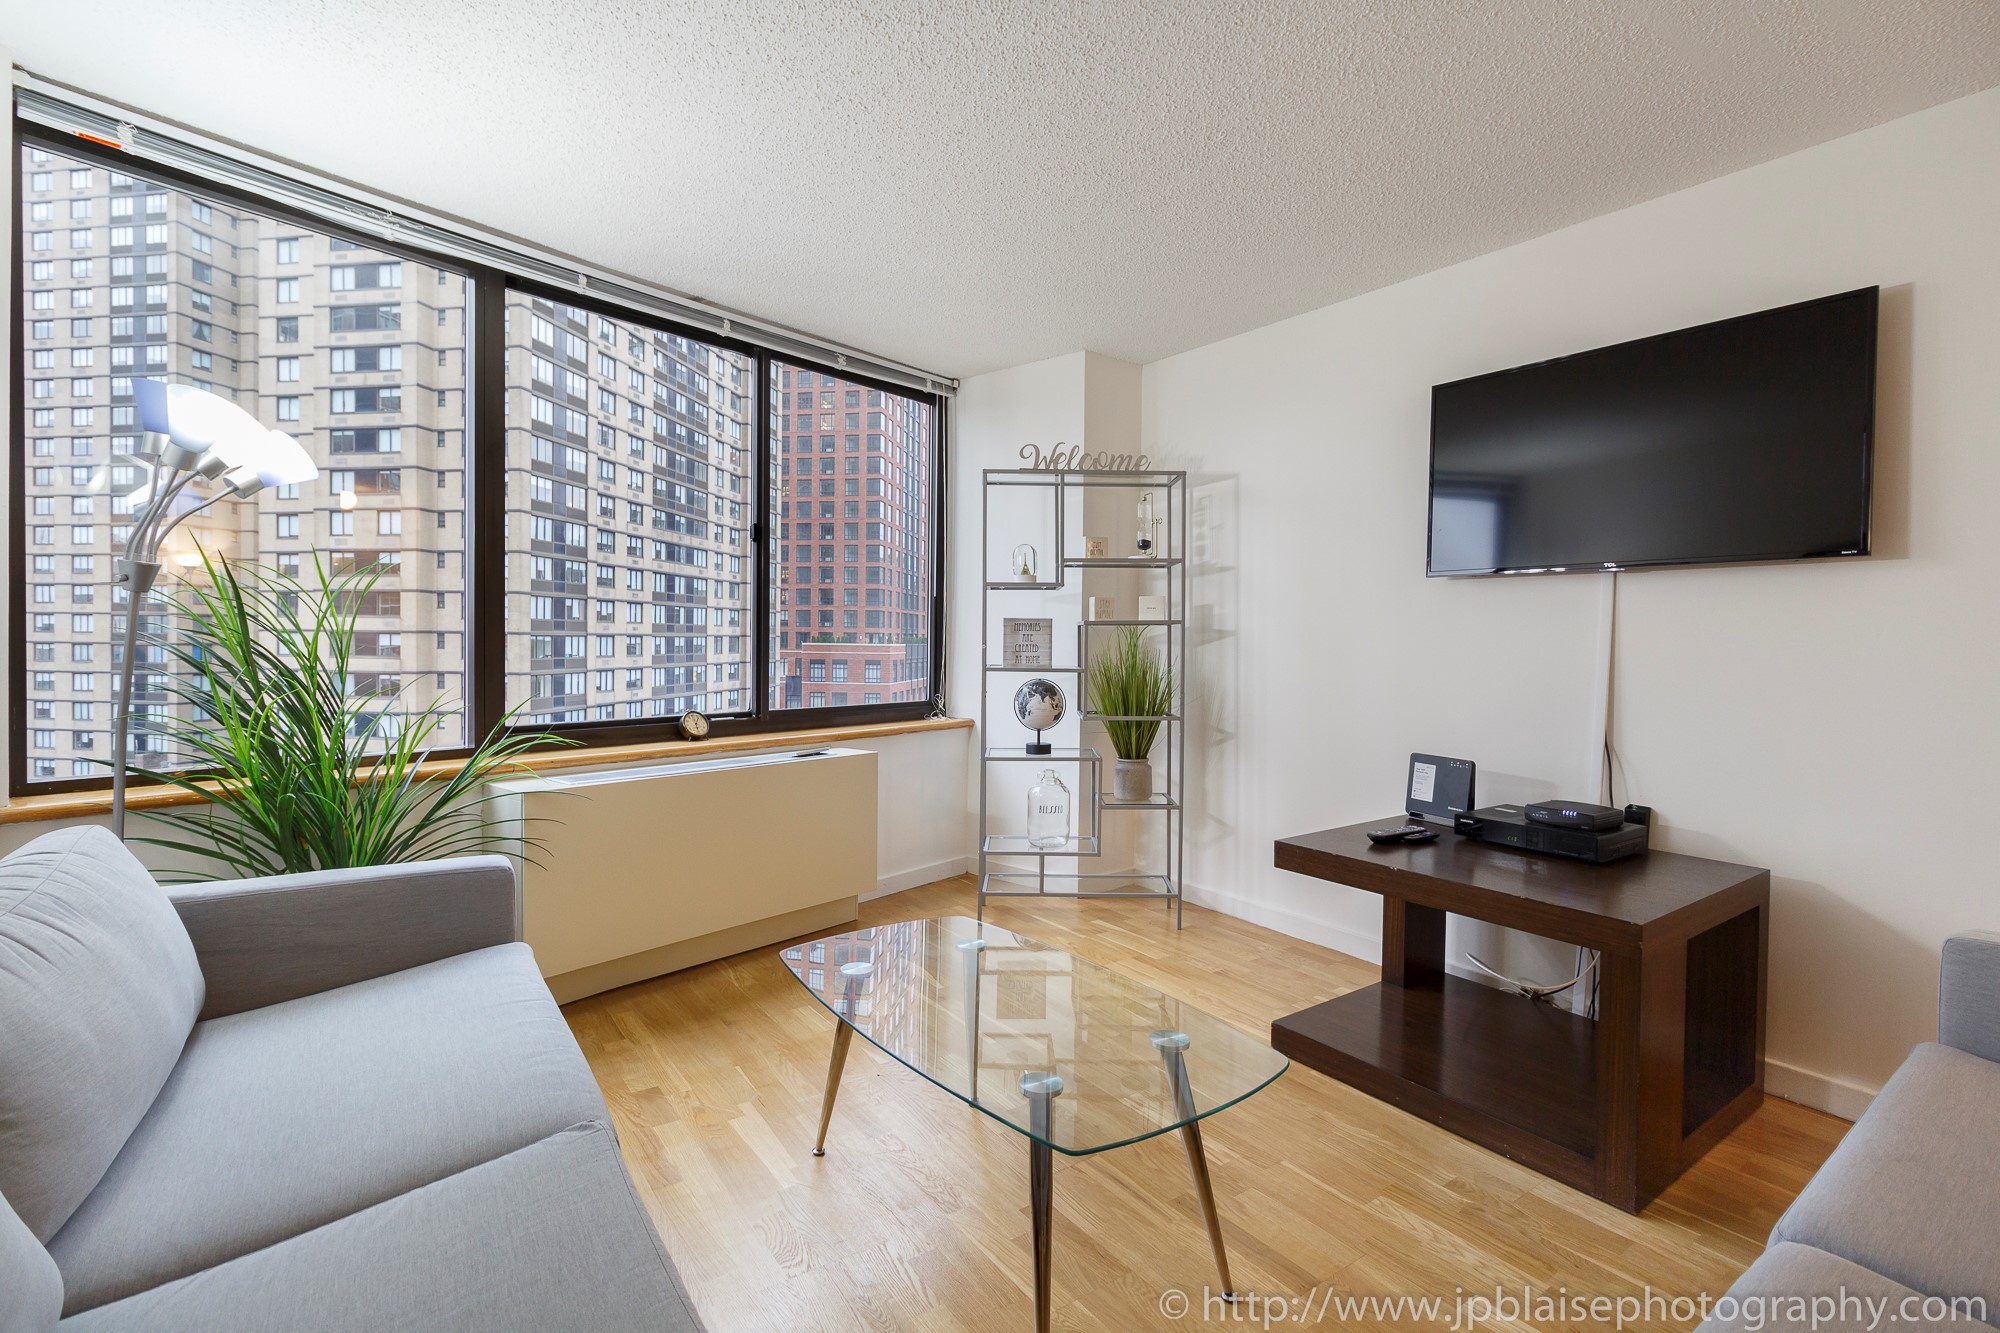 Apartment photographer real estate interior nyc ny new york Upper East Side condo TV